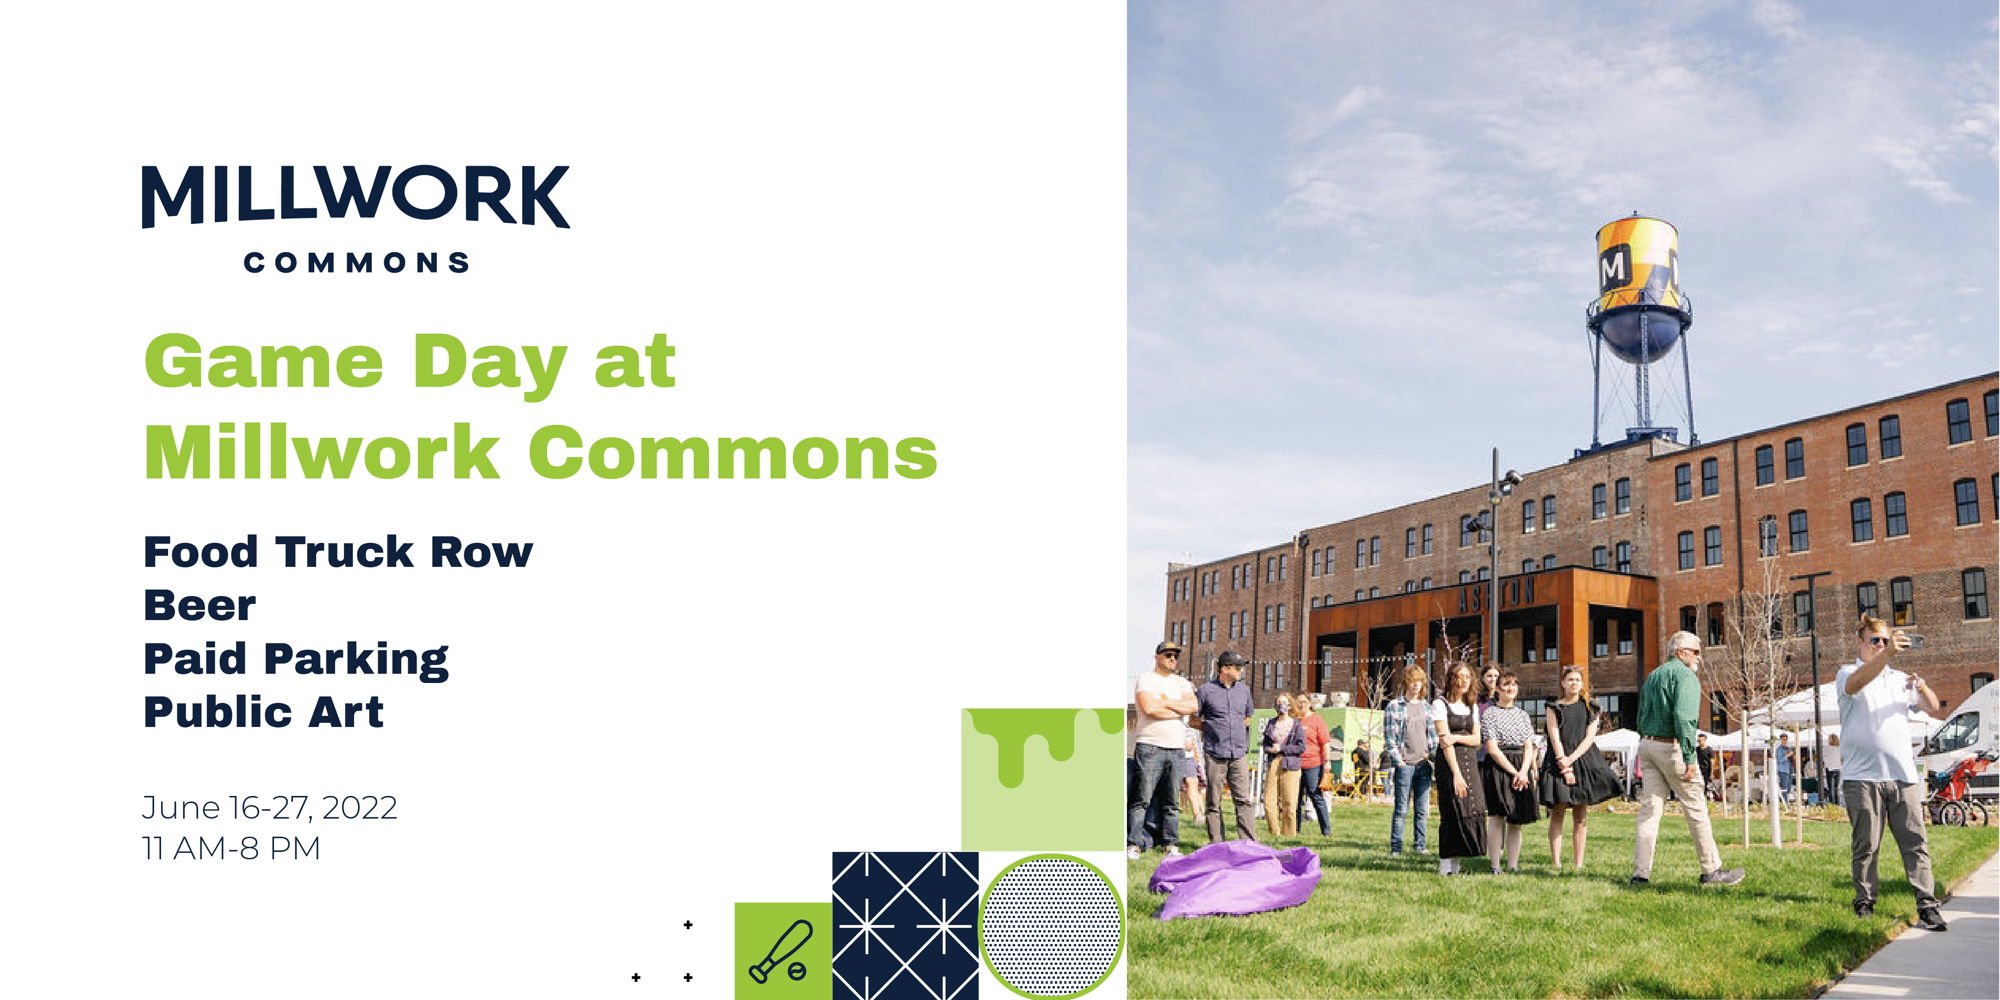 Game Day at Millwork Commons promotional image